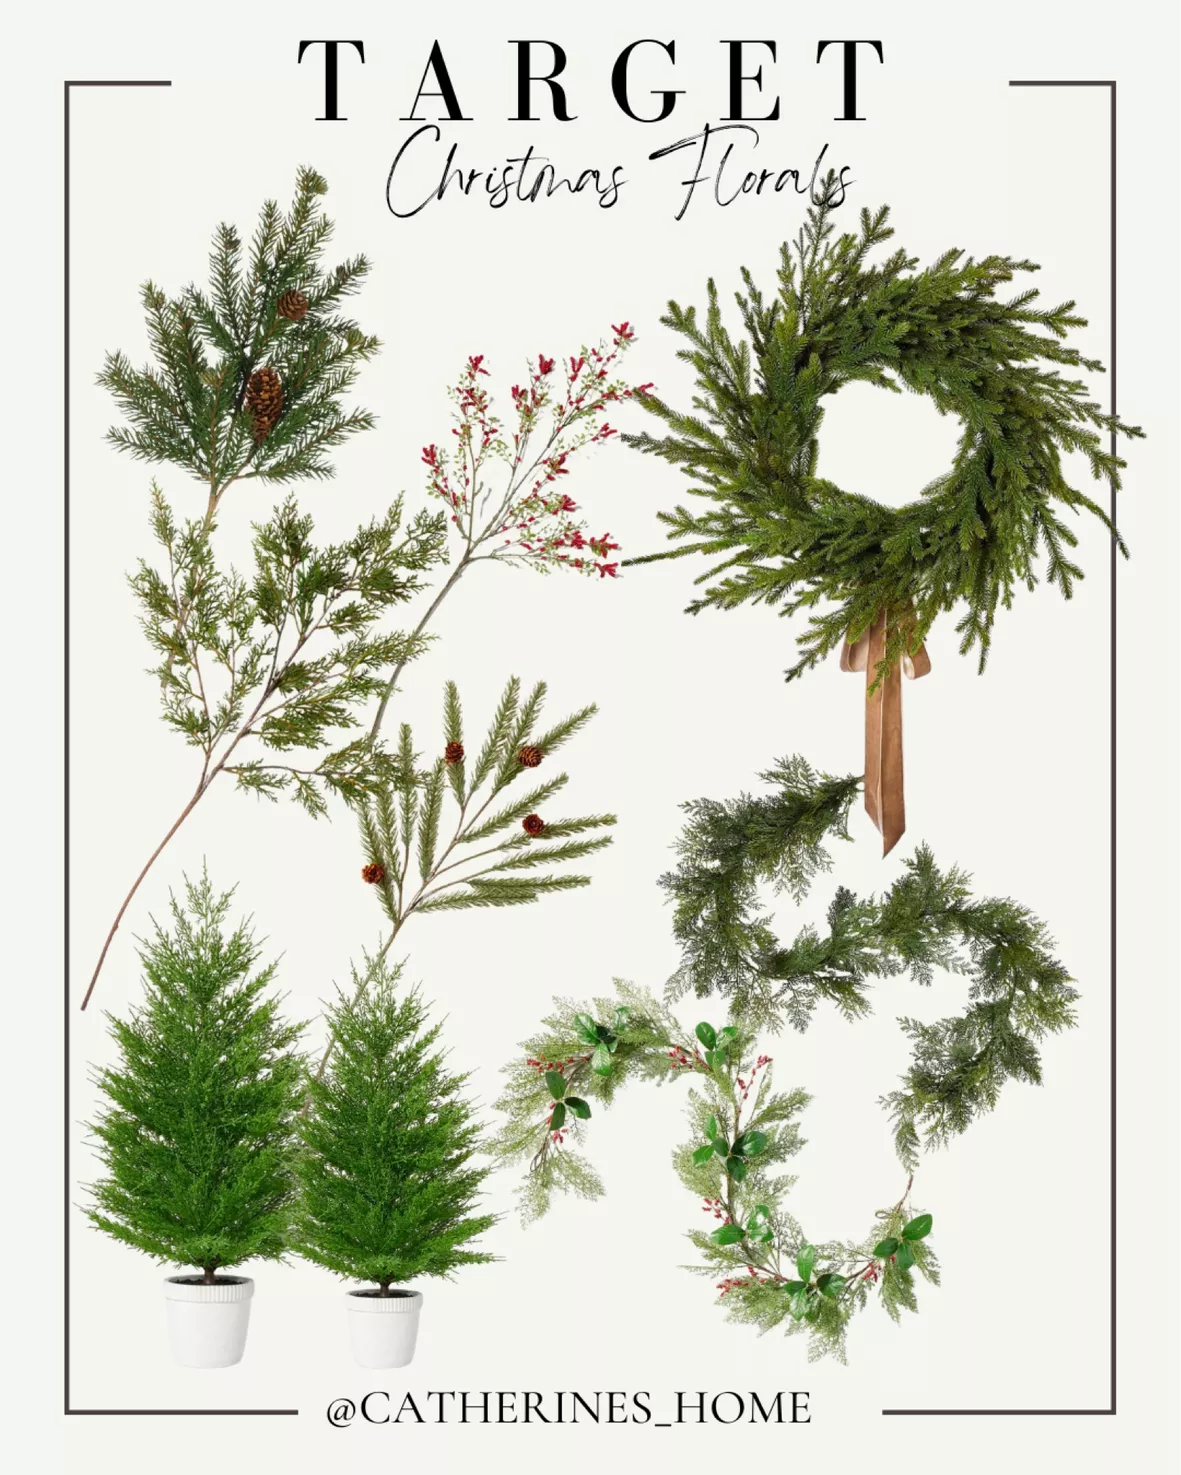 Artificial Christmas Greenery Stems : Target